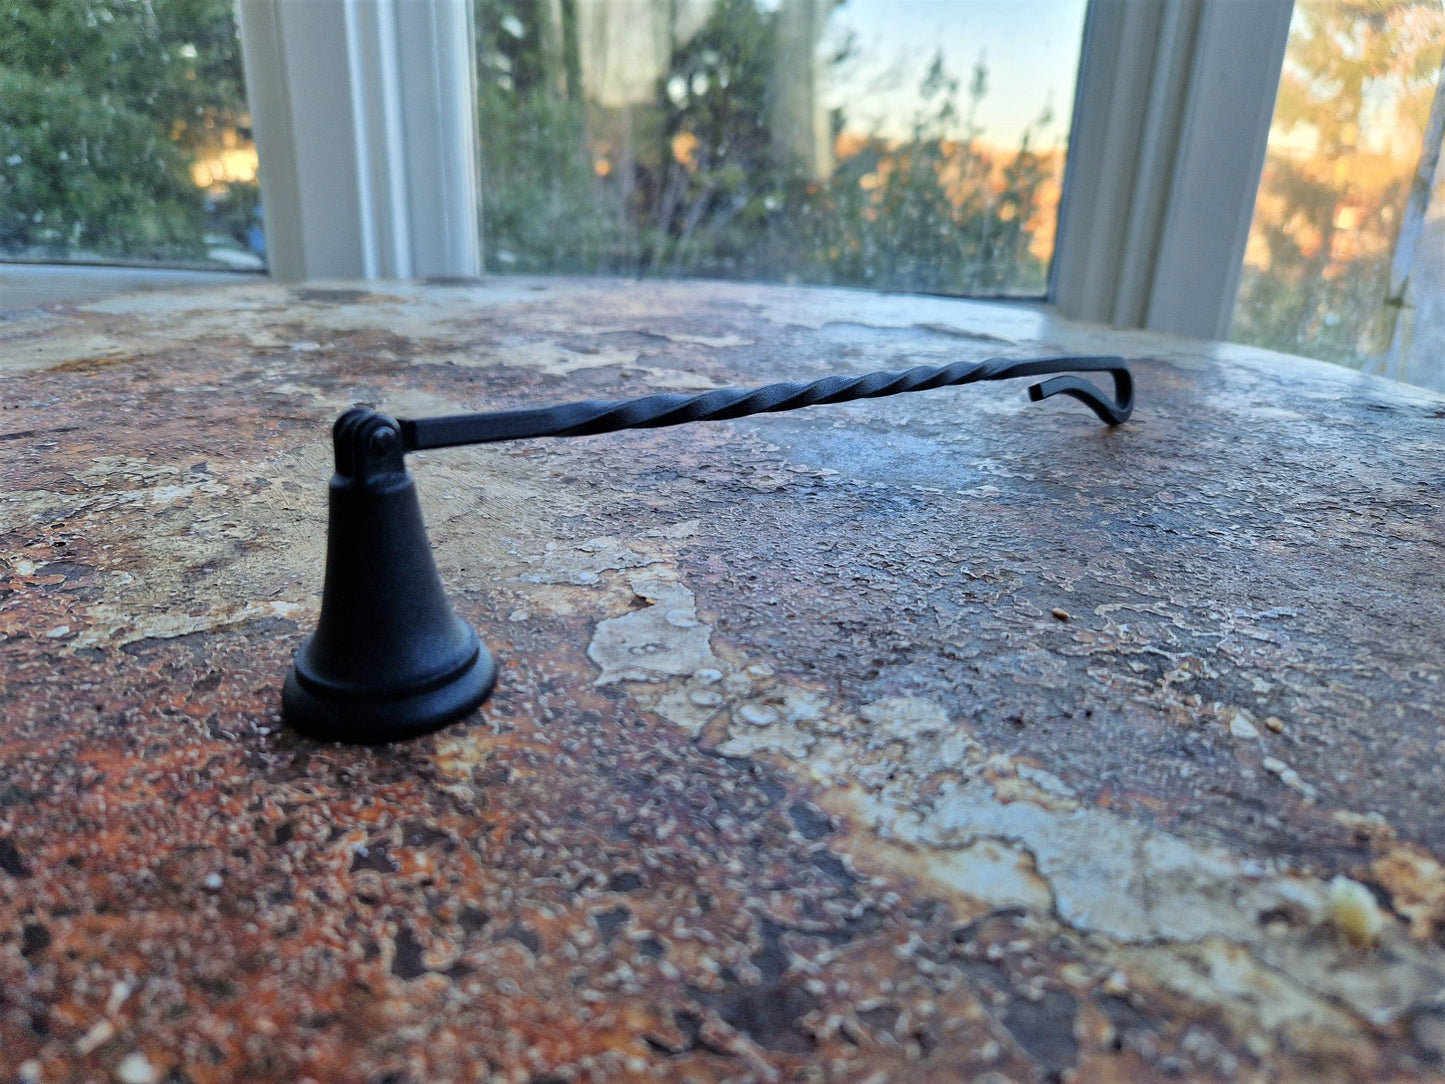 Candle snuffers